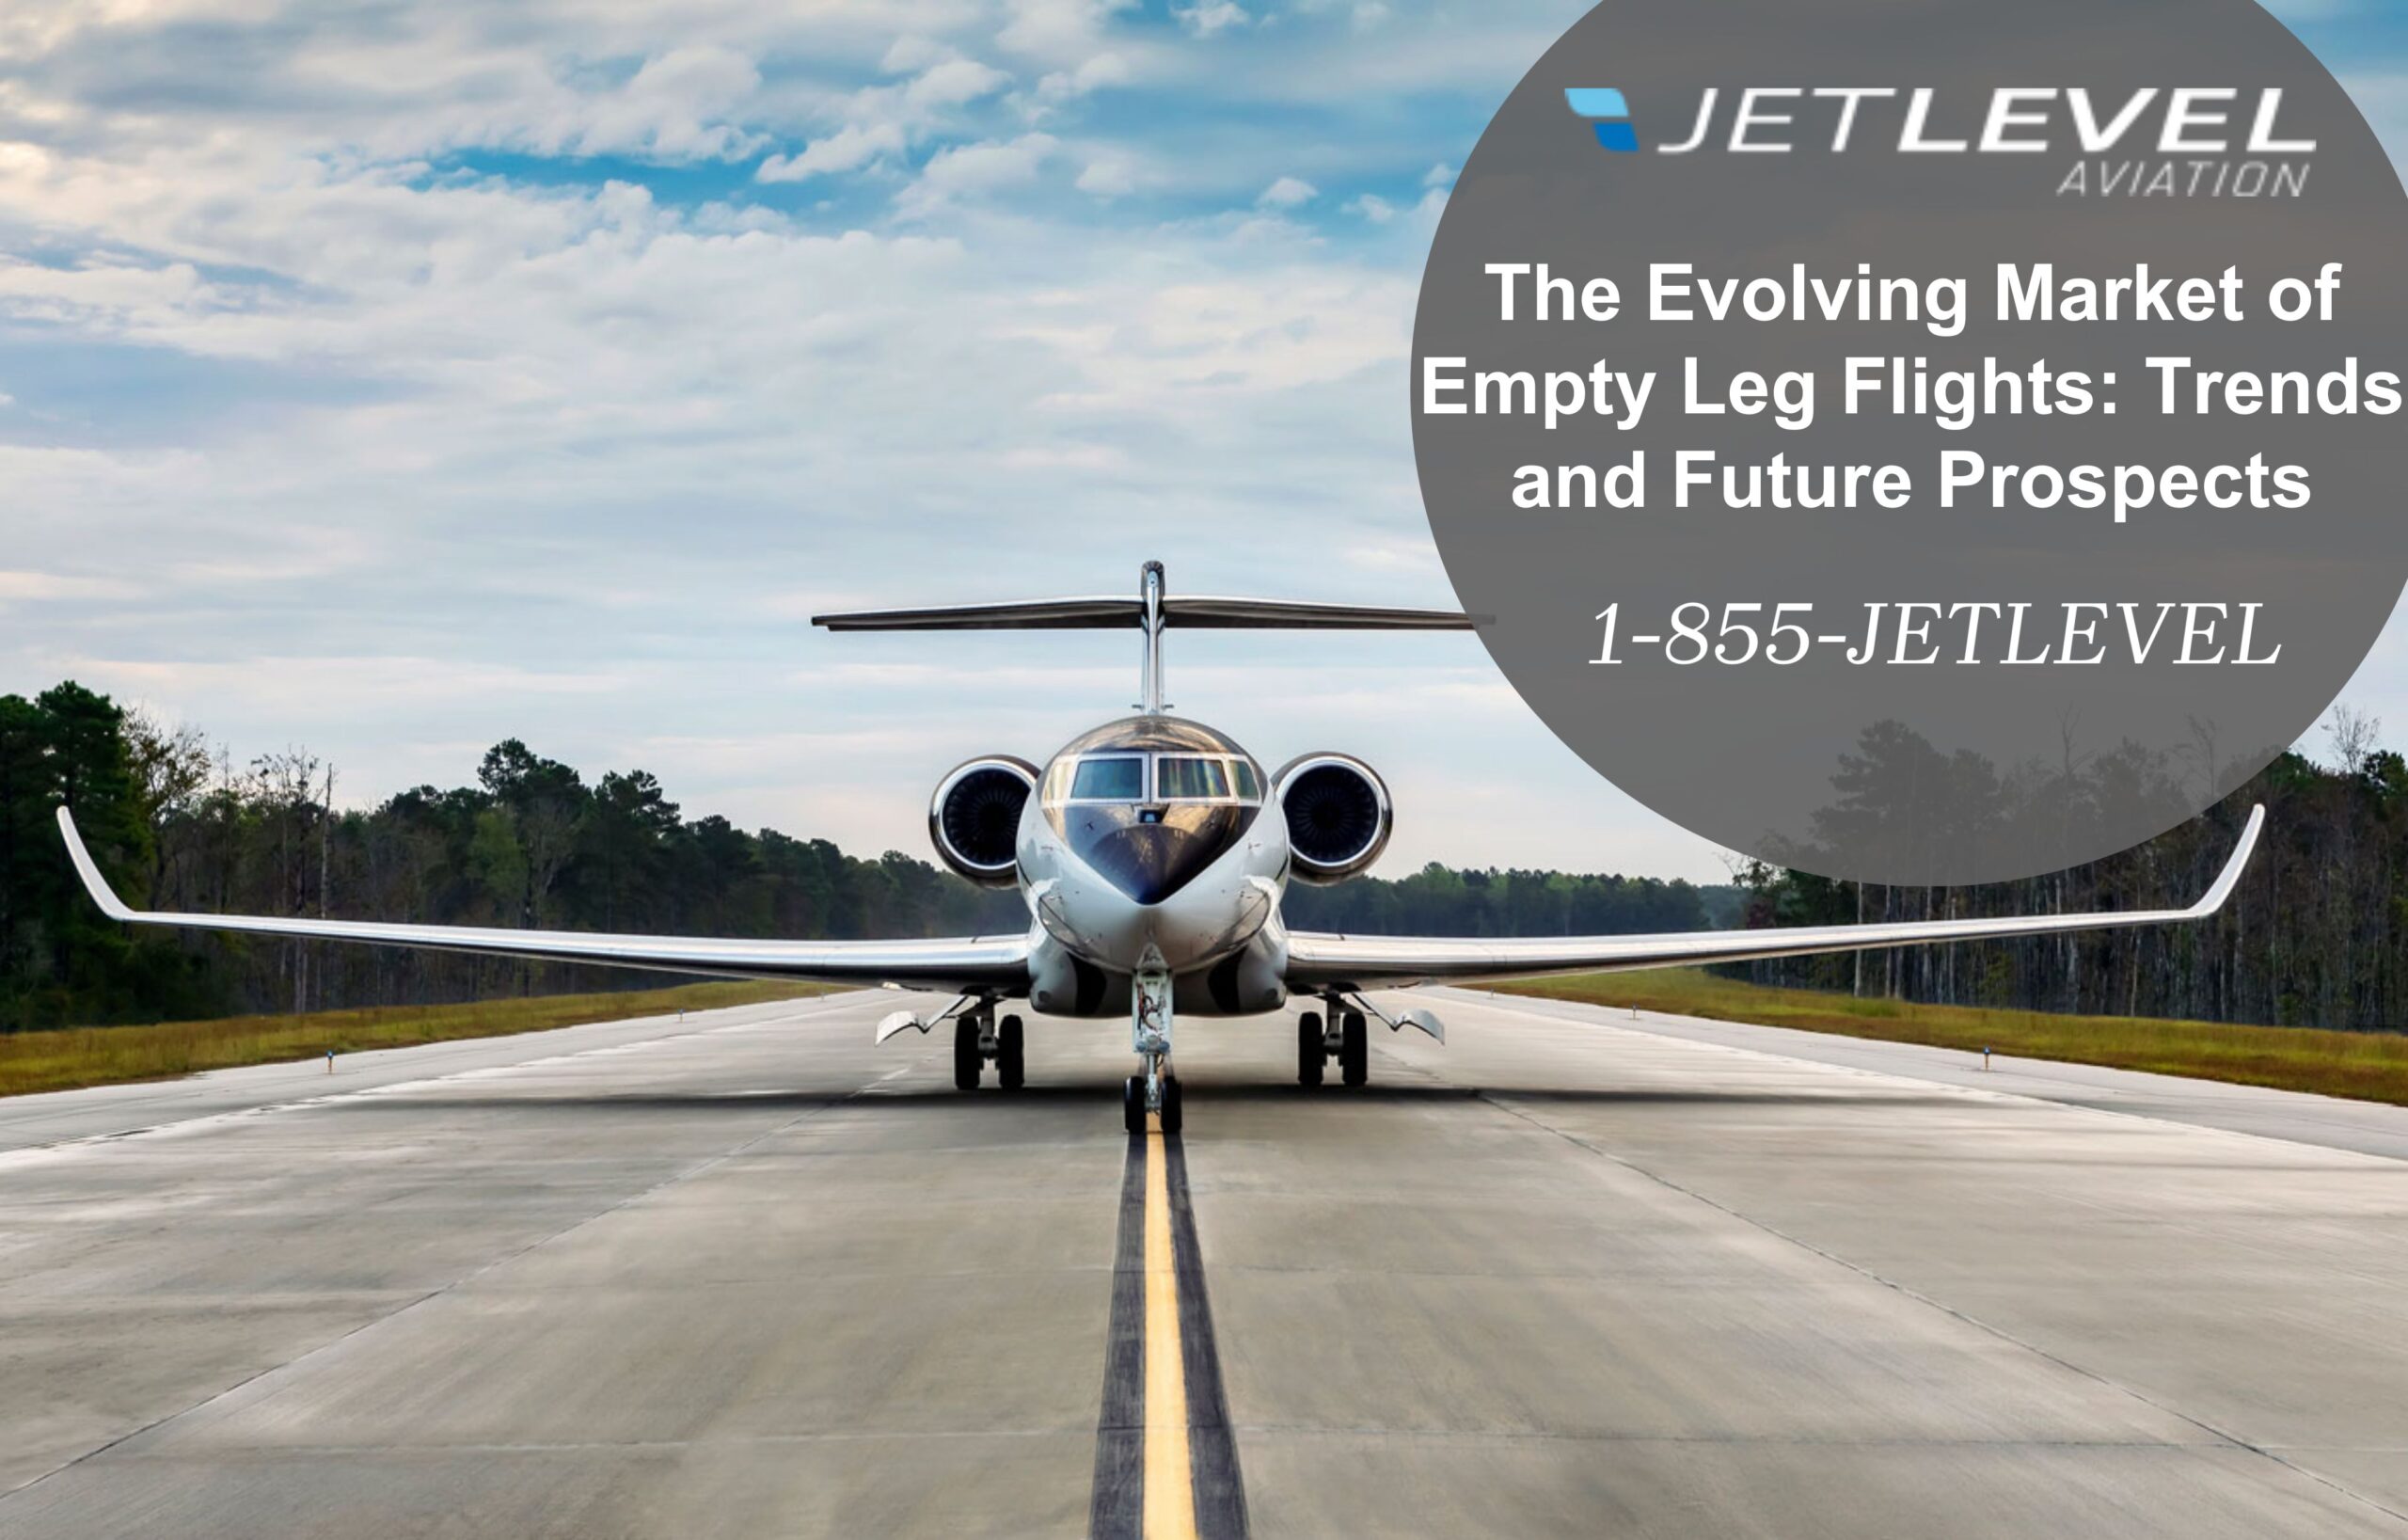 The Evolving Market of Empty Leg Flights: Trends and Future Prospects